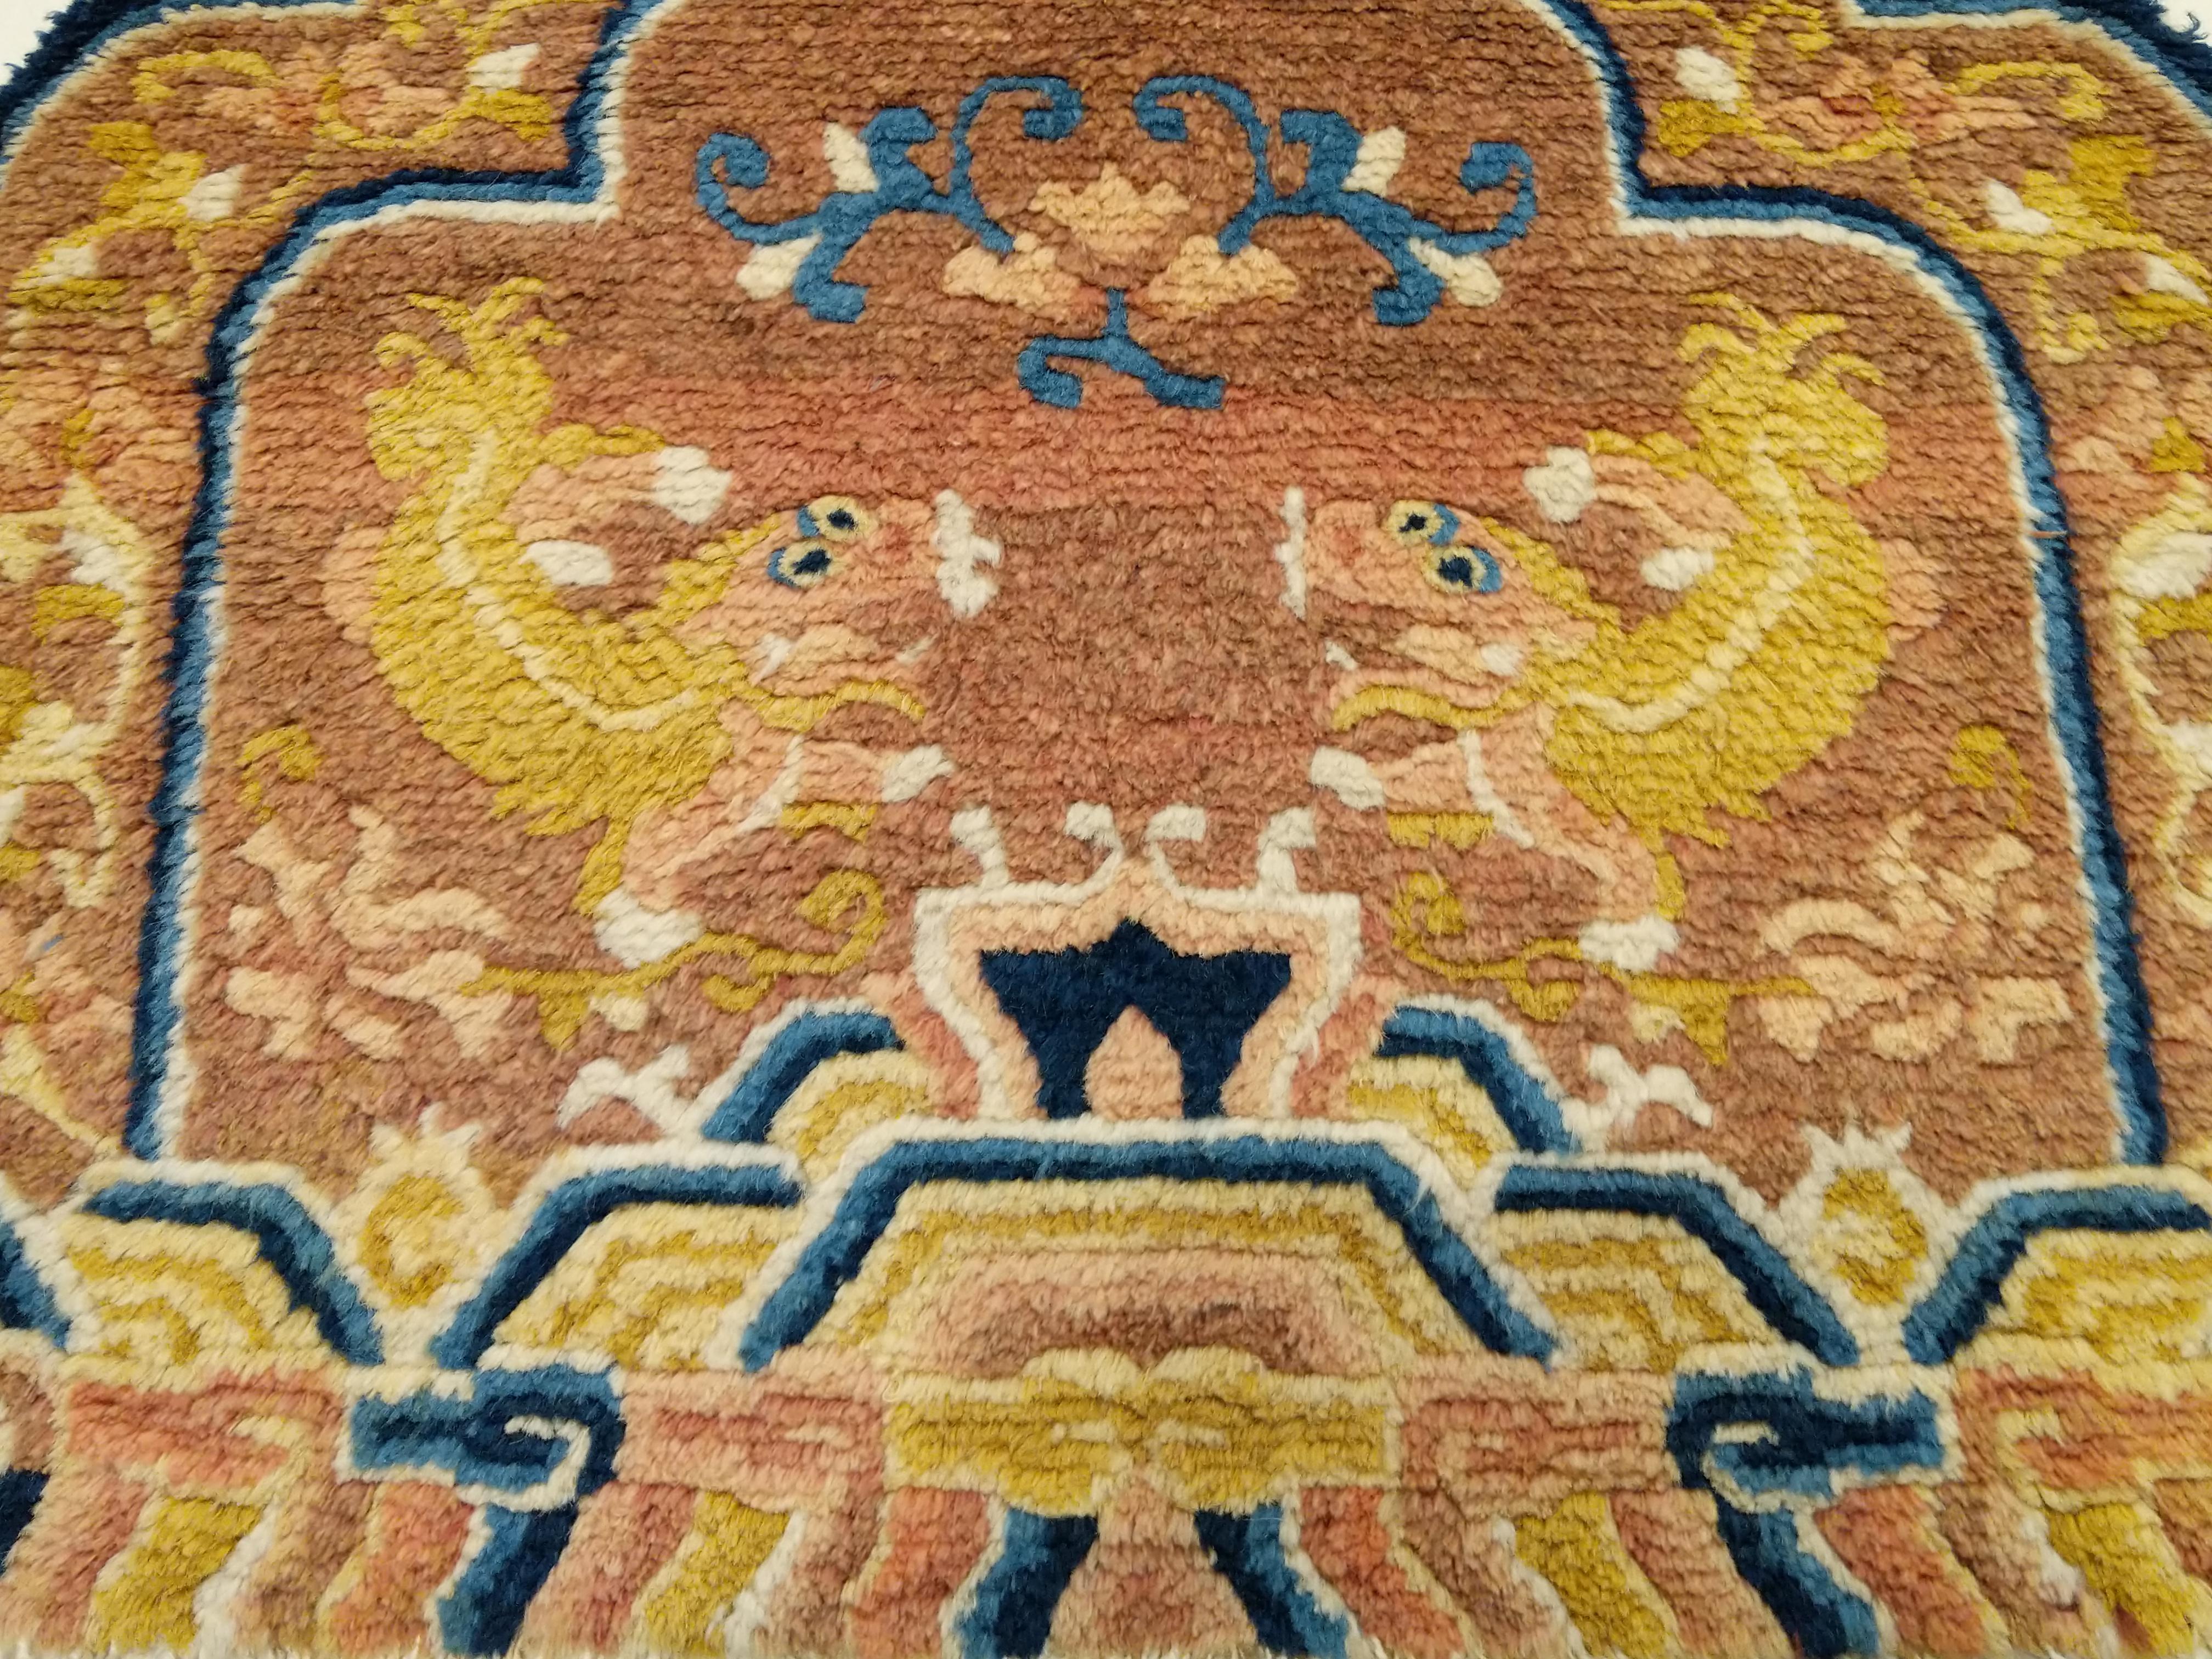 A rare example of Ningxia Chinese throne back cover of Imperial quality in pristine condition. A true gem distinguished by a plethora of shades of red, blue and yellow depicting a pair of superbly drawn lion dogs, auspicious symbols of protection